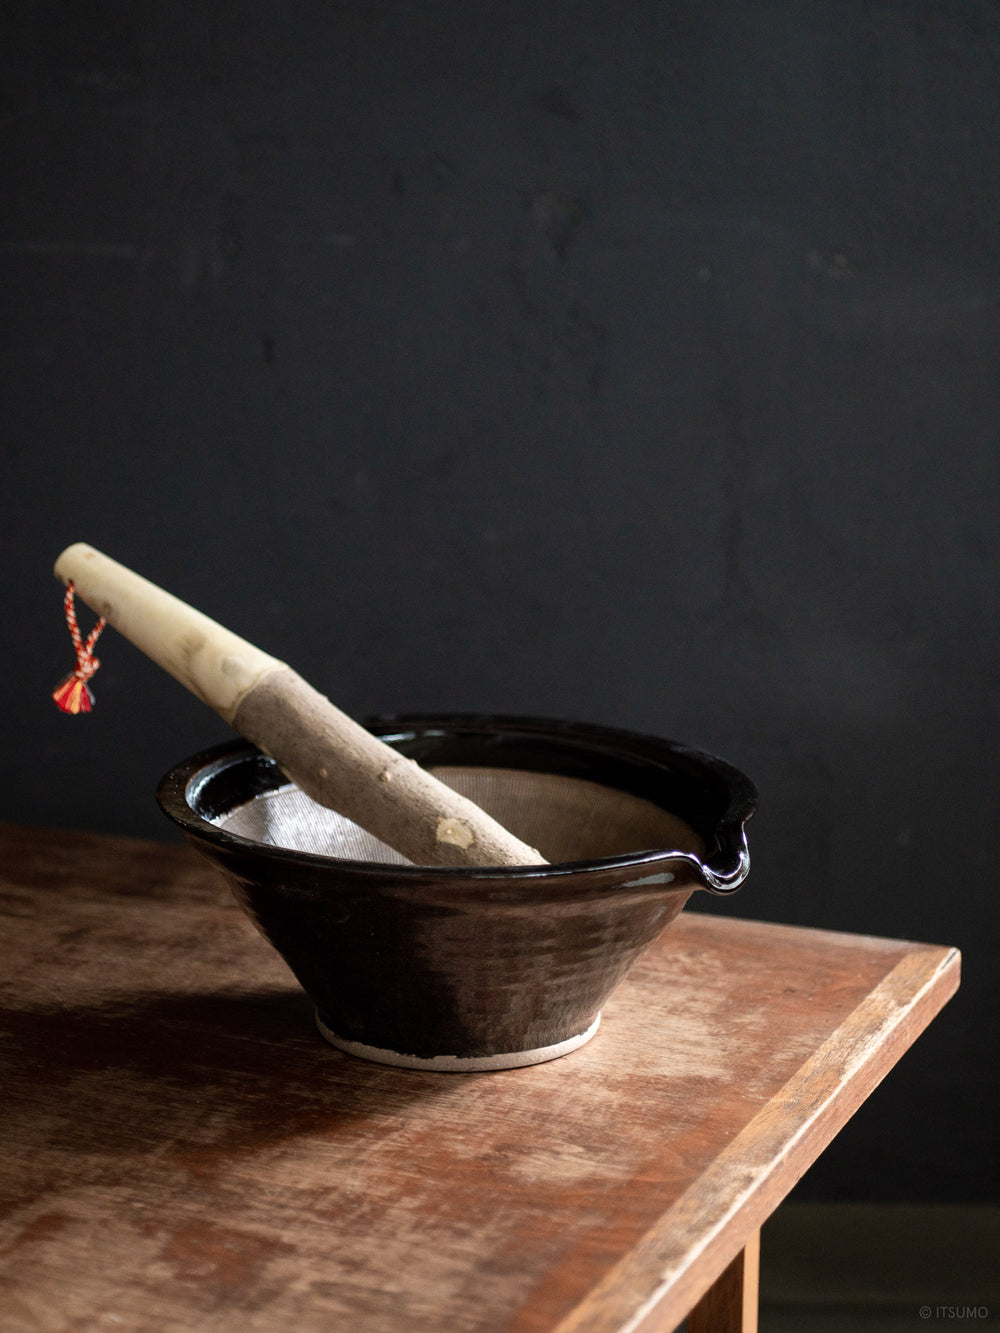 Azmaya's iga suribachi mortar in black glaze and a wooden pestle leaning inside the bowl